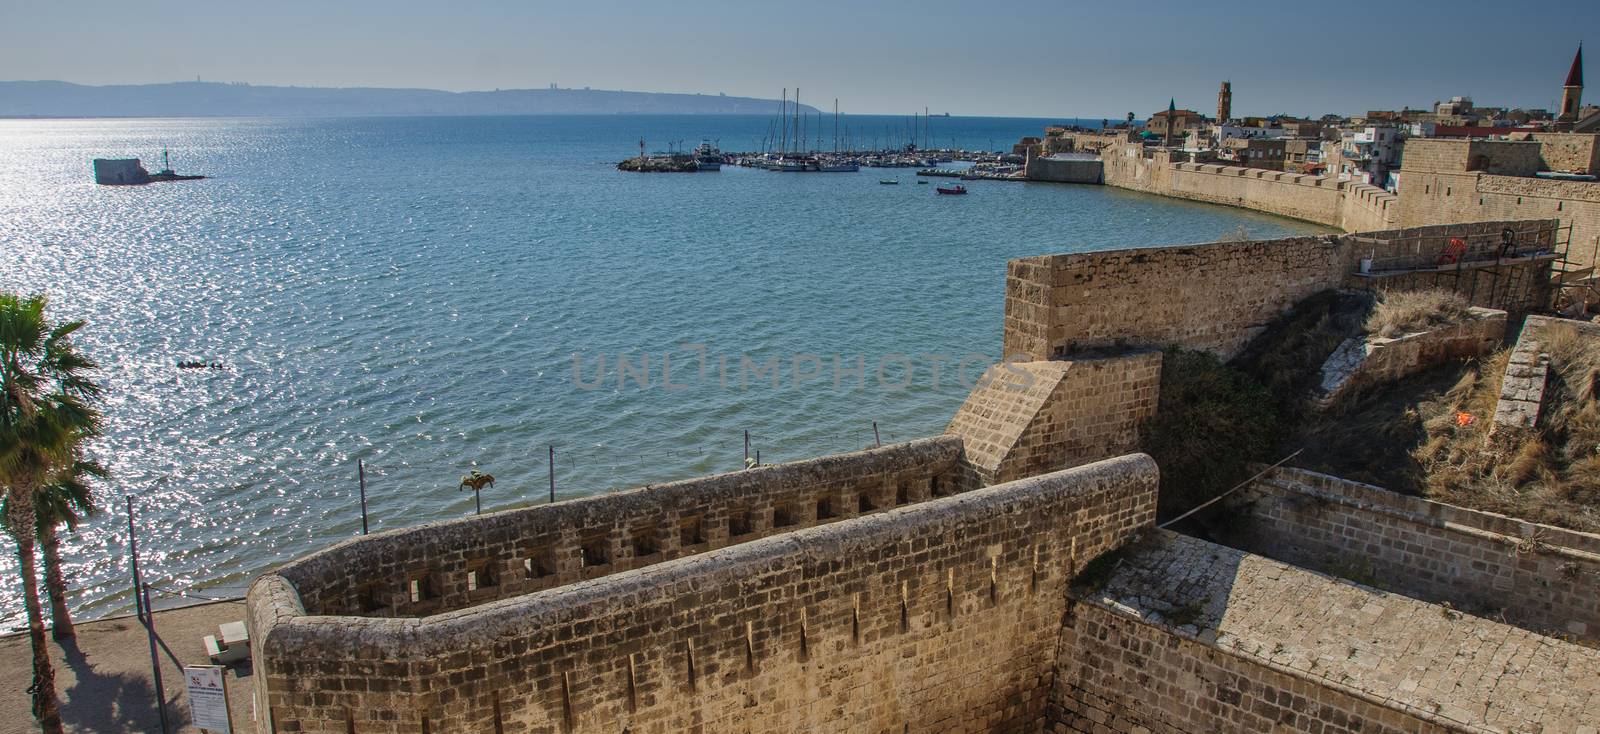 View of the city walls and the fishing harbor, the old city of Acre, Israel